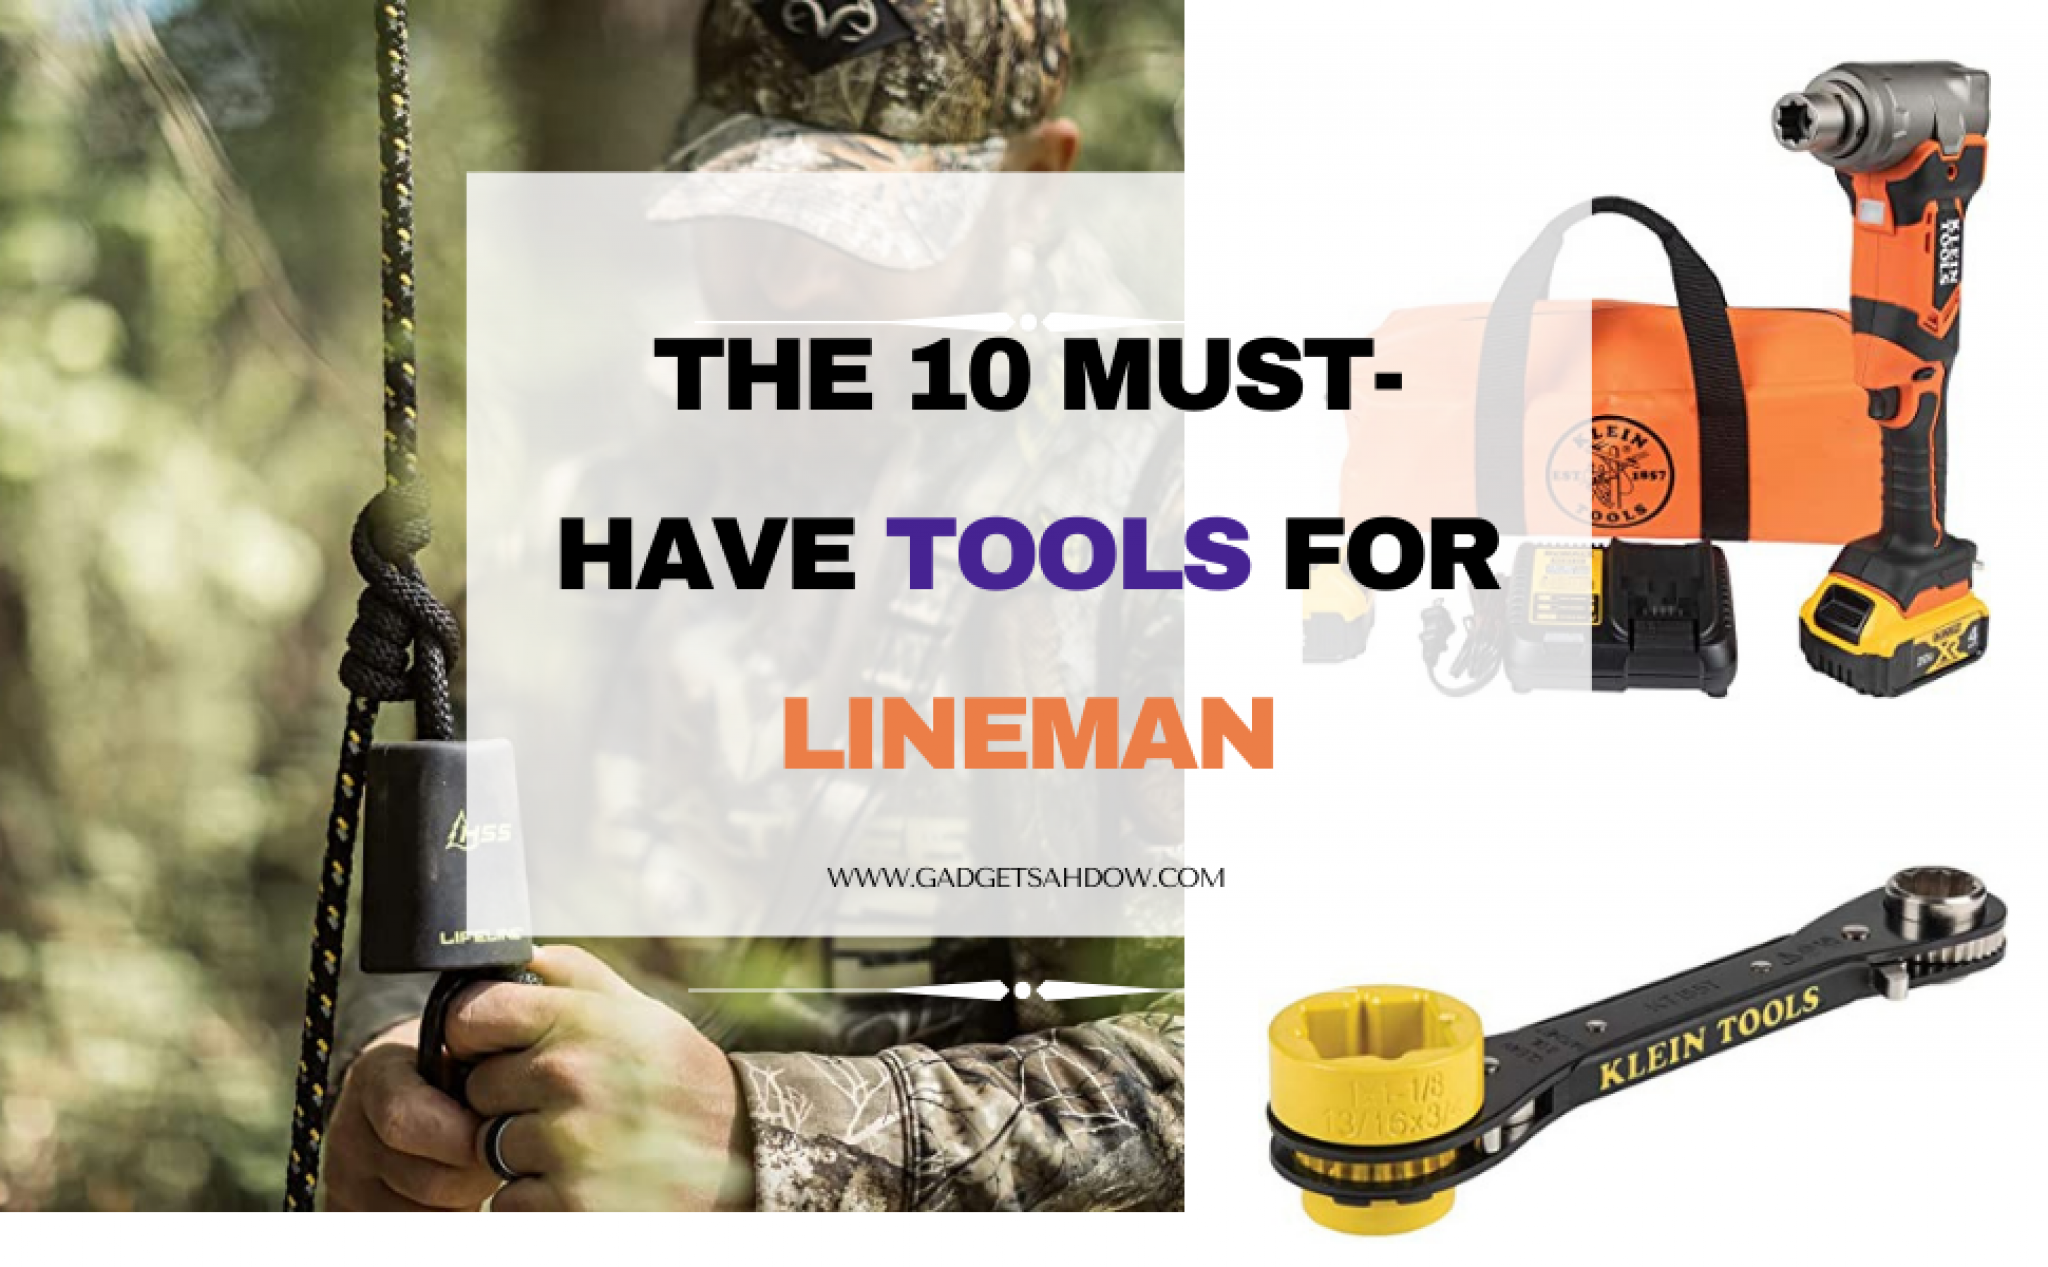 The 10 Must-Have Tools for Lineman - The Complete Guide | Gadget Shadow